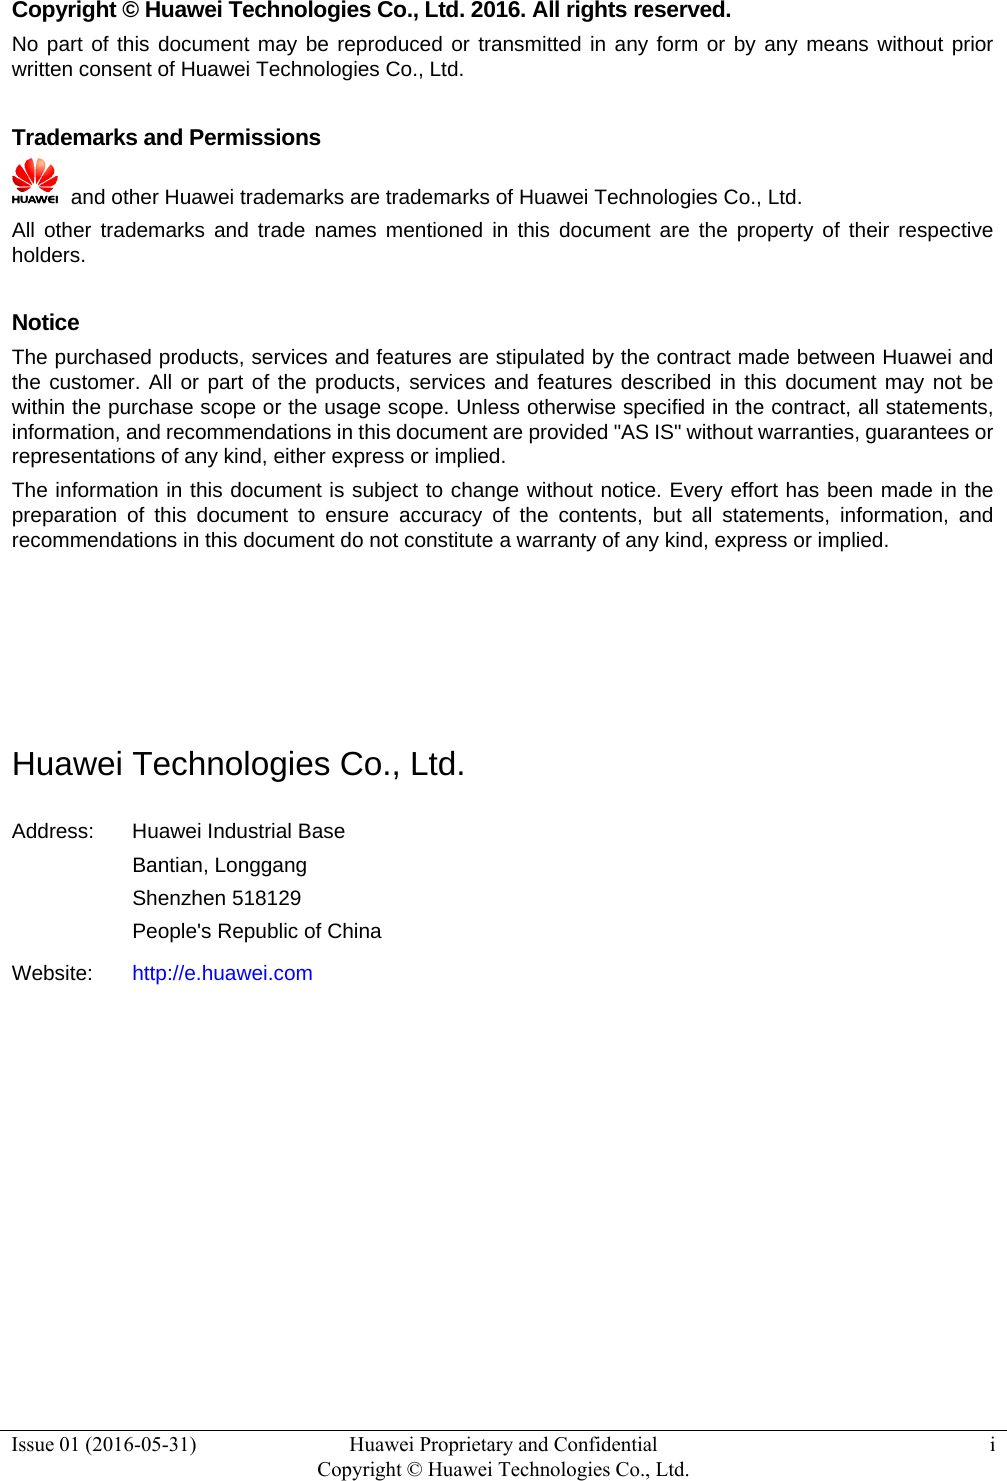  Issue 01 (2016-05-31)  Huawei Proprietary and Confidential         Copyright © Huawei Technologies Co., Ltd.i  Copyright © Huawei Technologies Co., Ltd. 2016. All rights reserved. No part of this document may be reproduced or transmitted in any form or by any means without prior written consent of Huawei Technologies Co., Ltd.  Trademarks and Permissions   and other Huawei trademarks are trademarks of Huawei Technologies Co., Ltd. All other trademarks and trade names mentioned in this document are the property of their respective holders.  Notice The purchased products, services and features are stipulated by the contract made between Huawei and the customer. All or part of the products, services and features described in this document may not be within the purchase scope or the usage scope. Unless otherwise specified in the contract, all statements, information, and recommendations in this document are provided &quot;AS IS&quot; without warranties, guarantees or representations of any kind, either express or implied. The information in this document is subject to change without notice. Every effort has been made in the preparation of this document to ensure accuracy of the contents, but all statements, information, and recommendations in this document do not constitute a warranty of any kind, express or implied.     Huawei Technologies Co., Ltd. Address:  Huawei Industrial Base Bantian, Longgang Shenzhen 518129 People&apos;s Republic of China Website:  http://e.huawei.com          